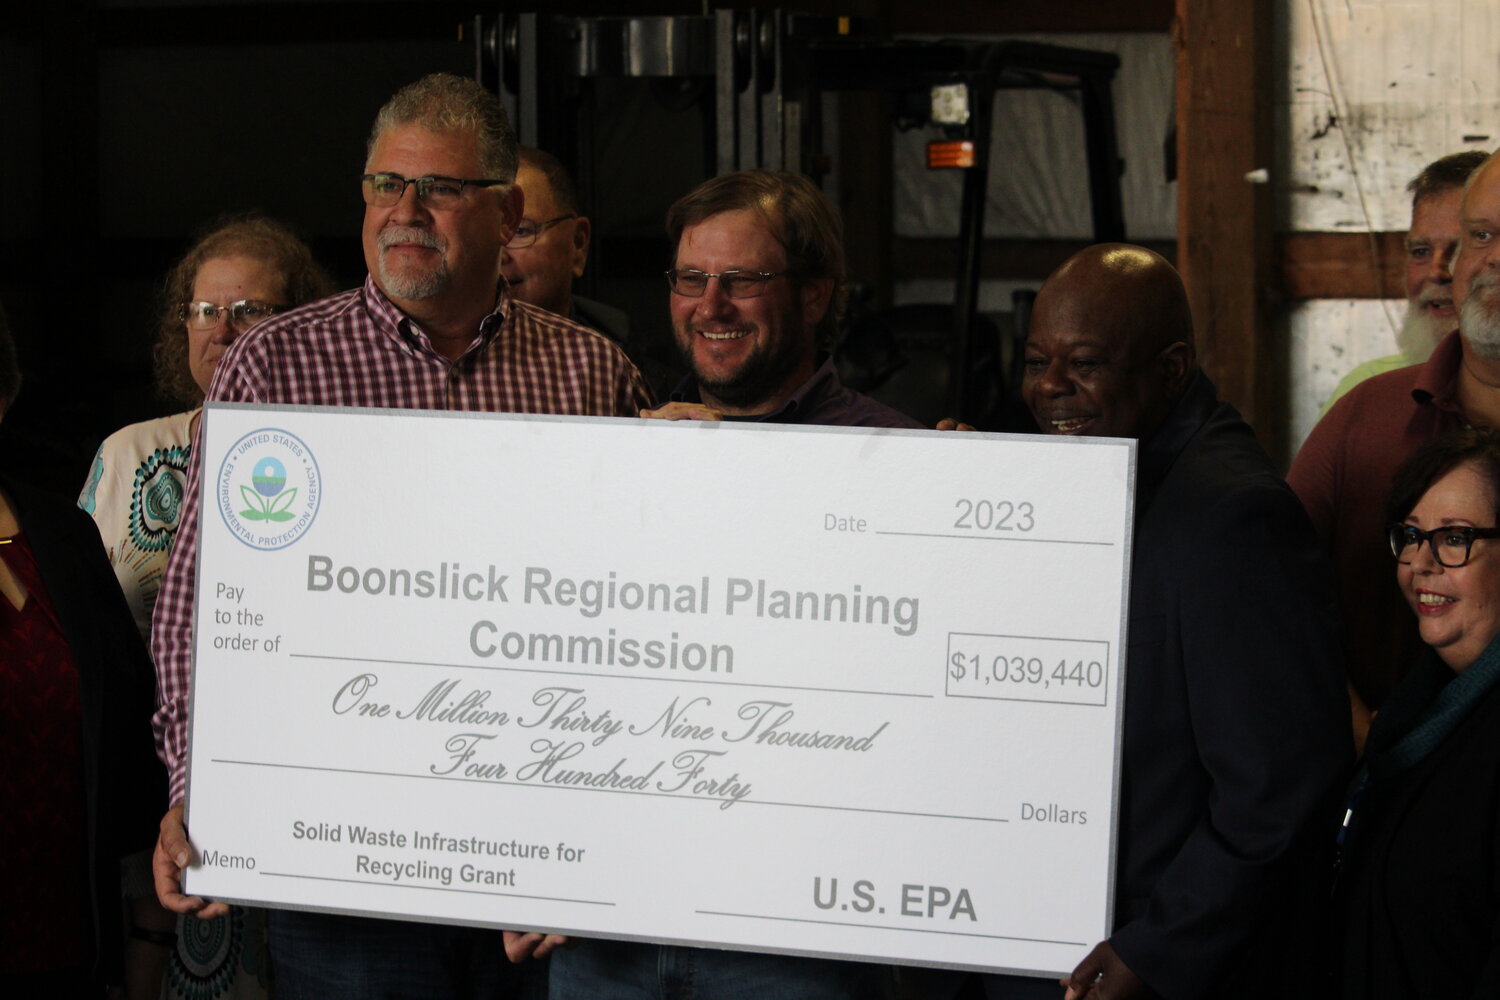 Warren County Presiding Commissioner Joe Gildehaus, Boonslick Regional Planning Commission Chairman Ryan Poston, and EPA Region 7 Brownfields, Redevelopment and Reuse Branch Chief Stan Walker hold the ceremonial oversized check for $1,039,440 that was presented to Boonslick Regional Planning Commission on Oct. 26 at the East Central Missouri Recycling Center in Warrenton. The Boonslick Regional Planning Commission received the money from the Environmental Protection Agency as part of a Solid Waste Infrastructure Recycling grant. The money will benefit the East Central Solid Waste Management District, which serves Warren, Montgomery, Lincoln and Franklin Counties and will be used to purchase a truck, trailer, styrofoam compactor, and build a new storage house with a concrete driveway. There will also be 20 staffed drop-off locations throughout the four counties to help prevent the need for people to drive to Warrenton with their recycling. A new worker will also be hired to transfer material. “The drop off is going to be huge and having better equipment is going to be phenomenal,” Gildehaus said.